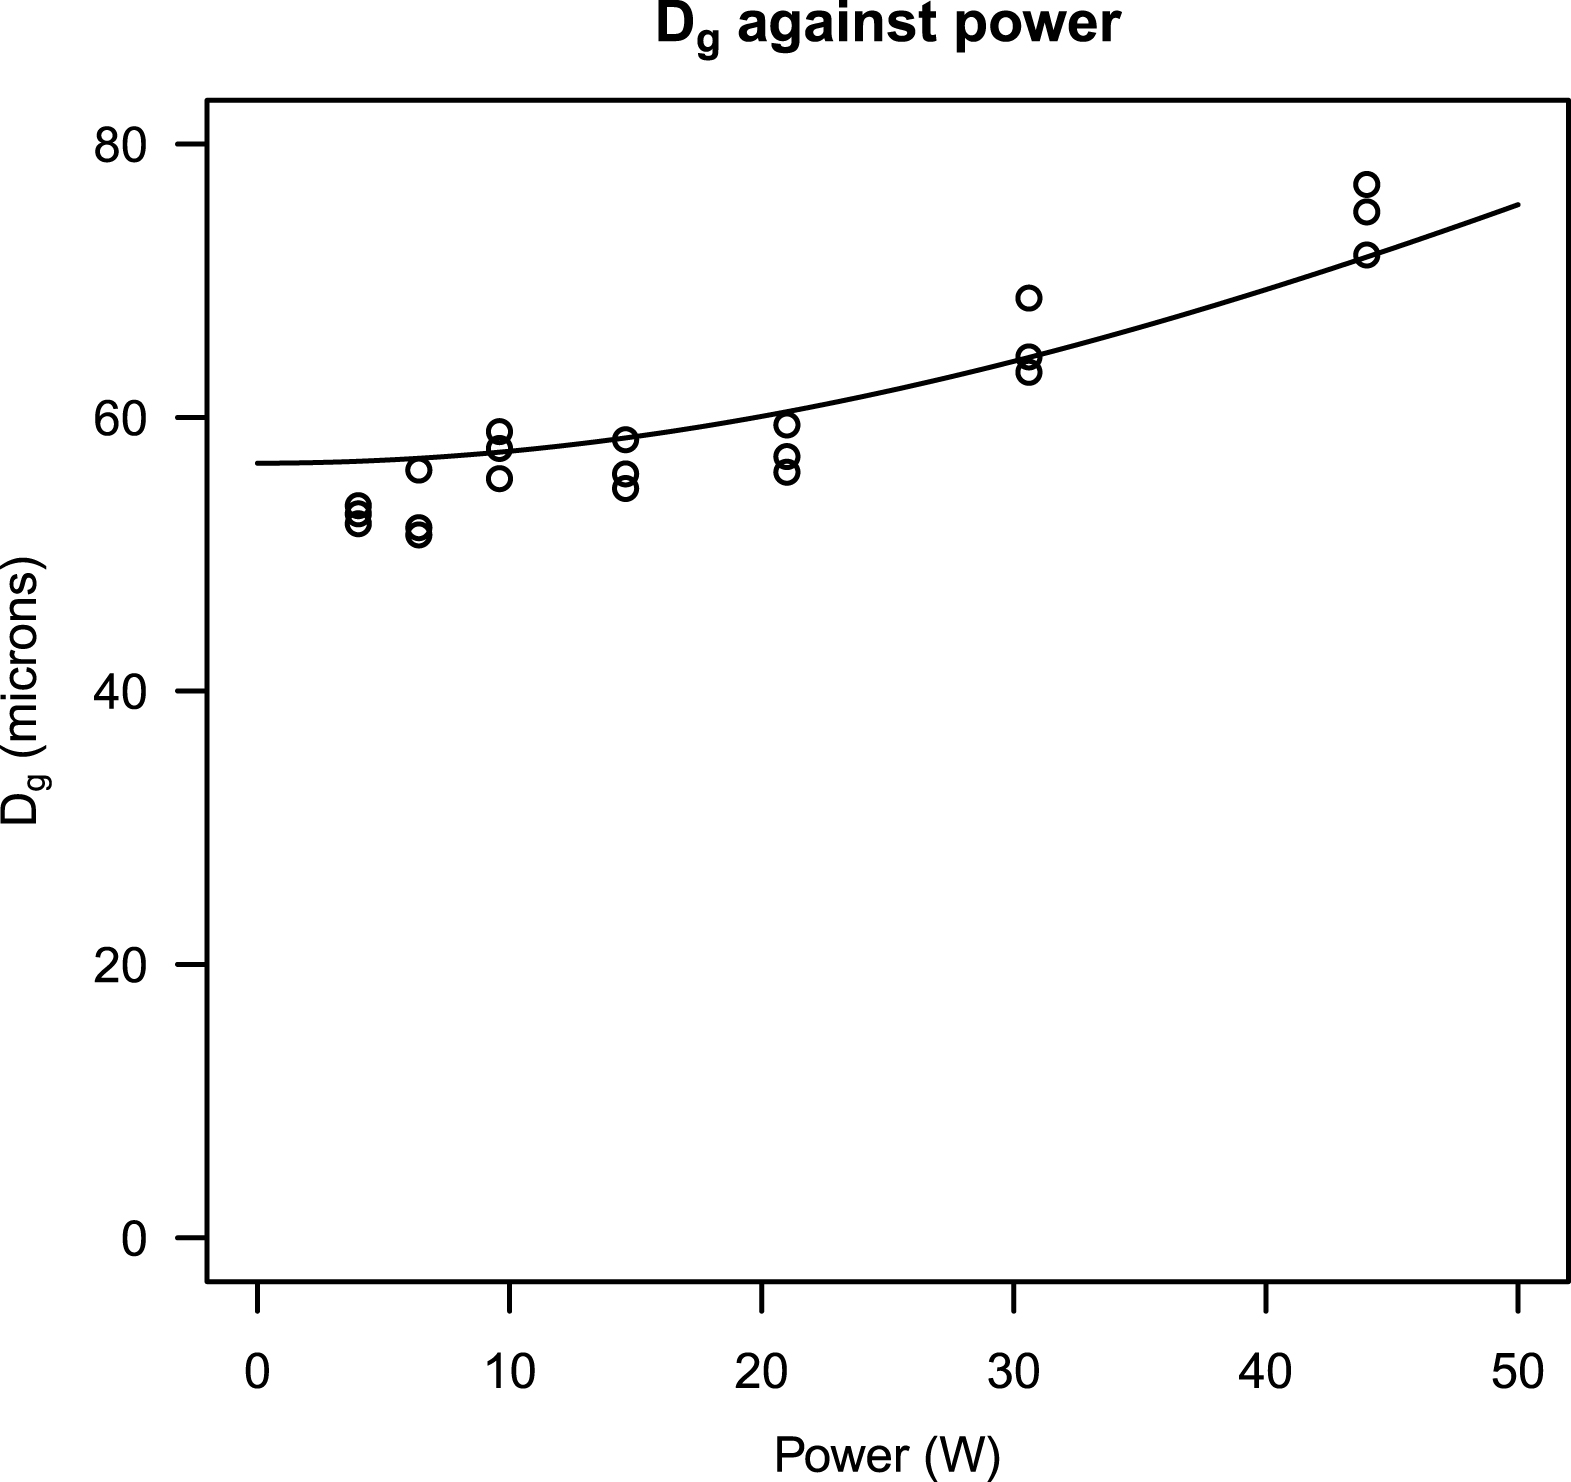 Plot of Dg against power. The curve shows the expected unsharpness, as detailed in Equation 5.